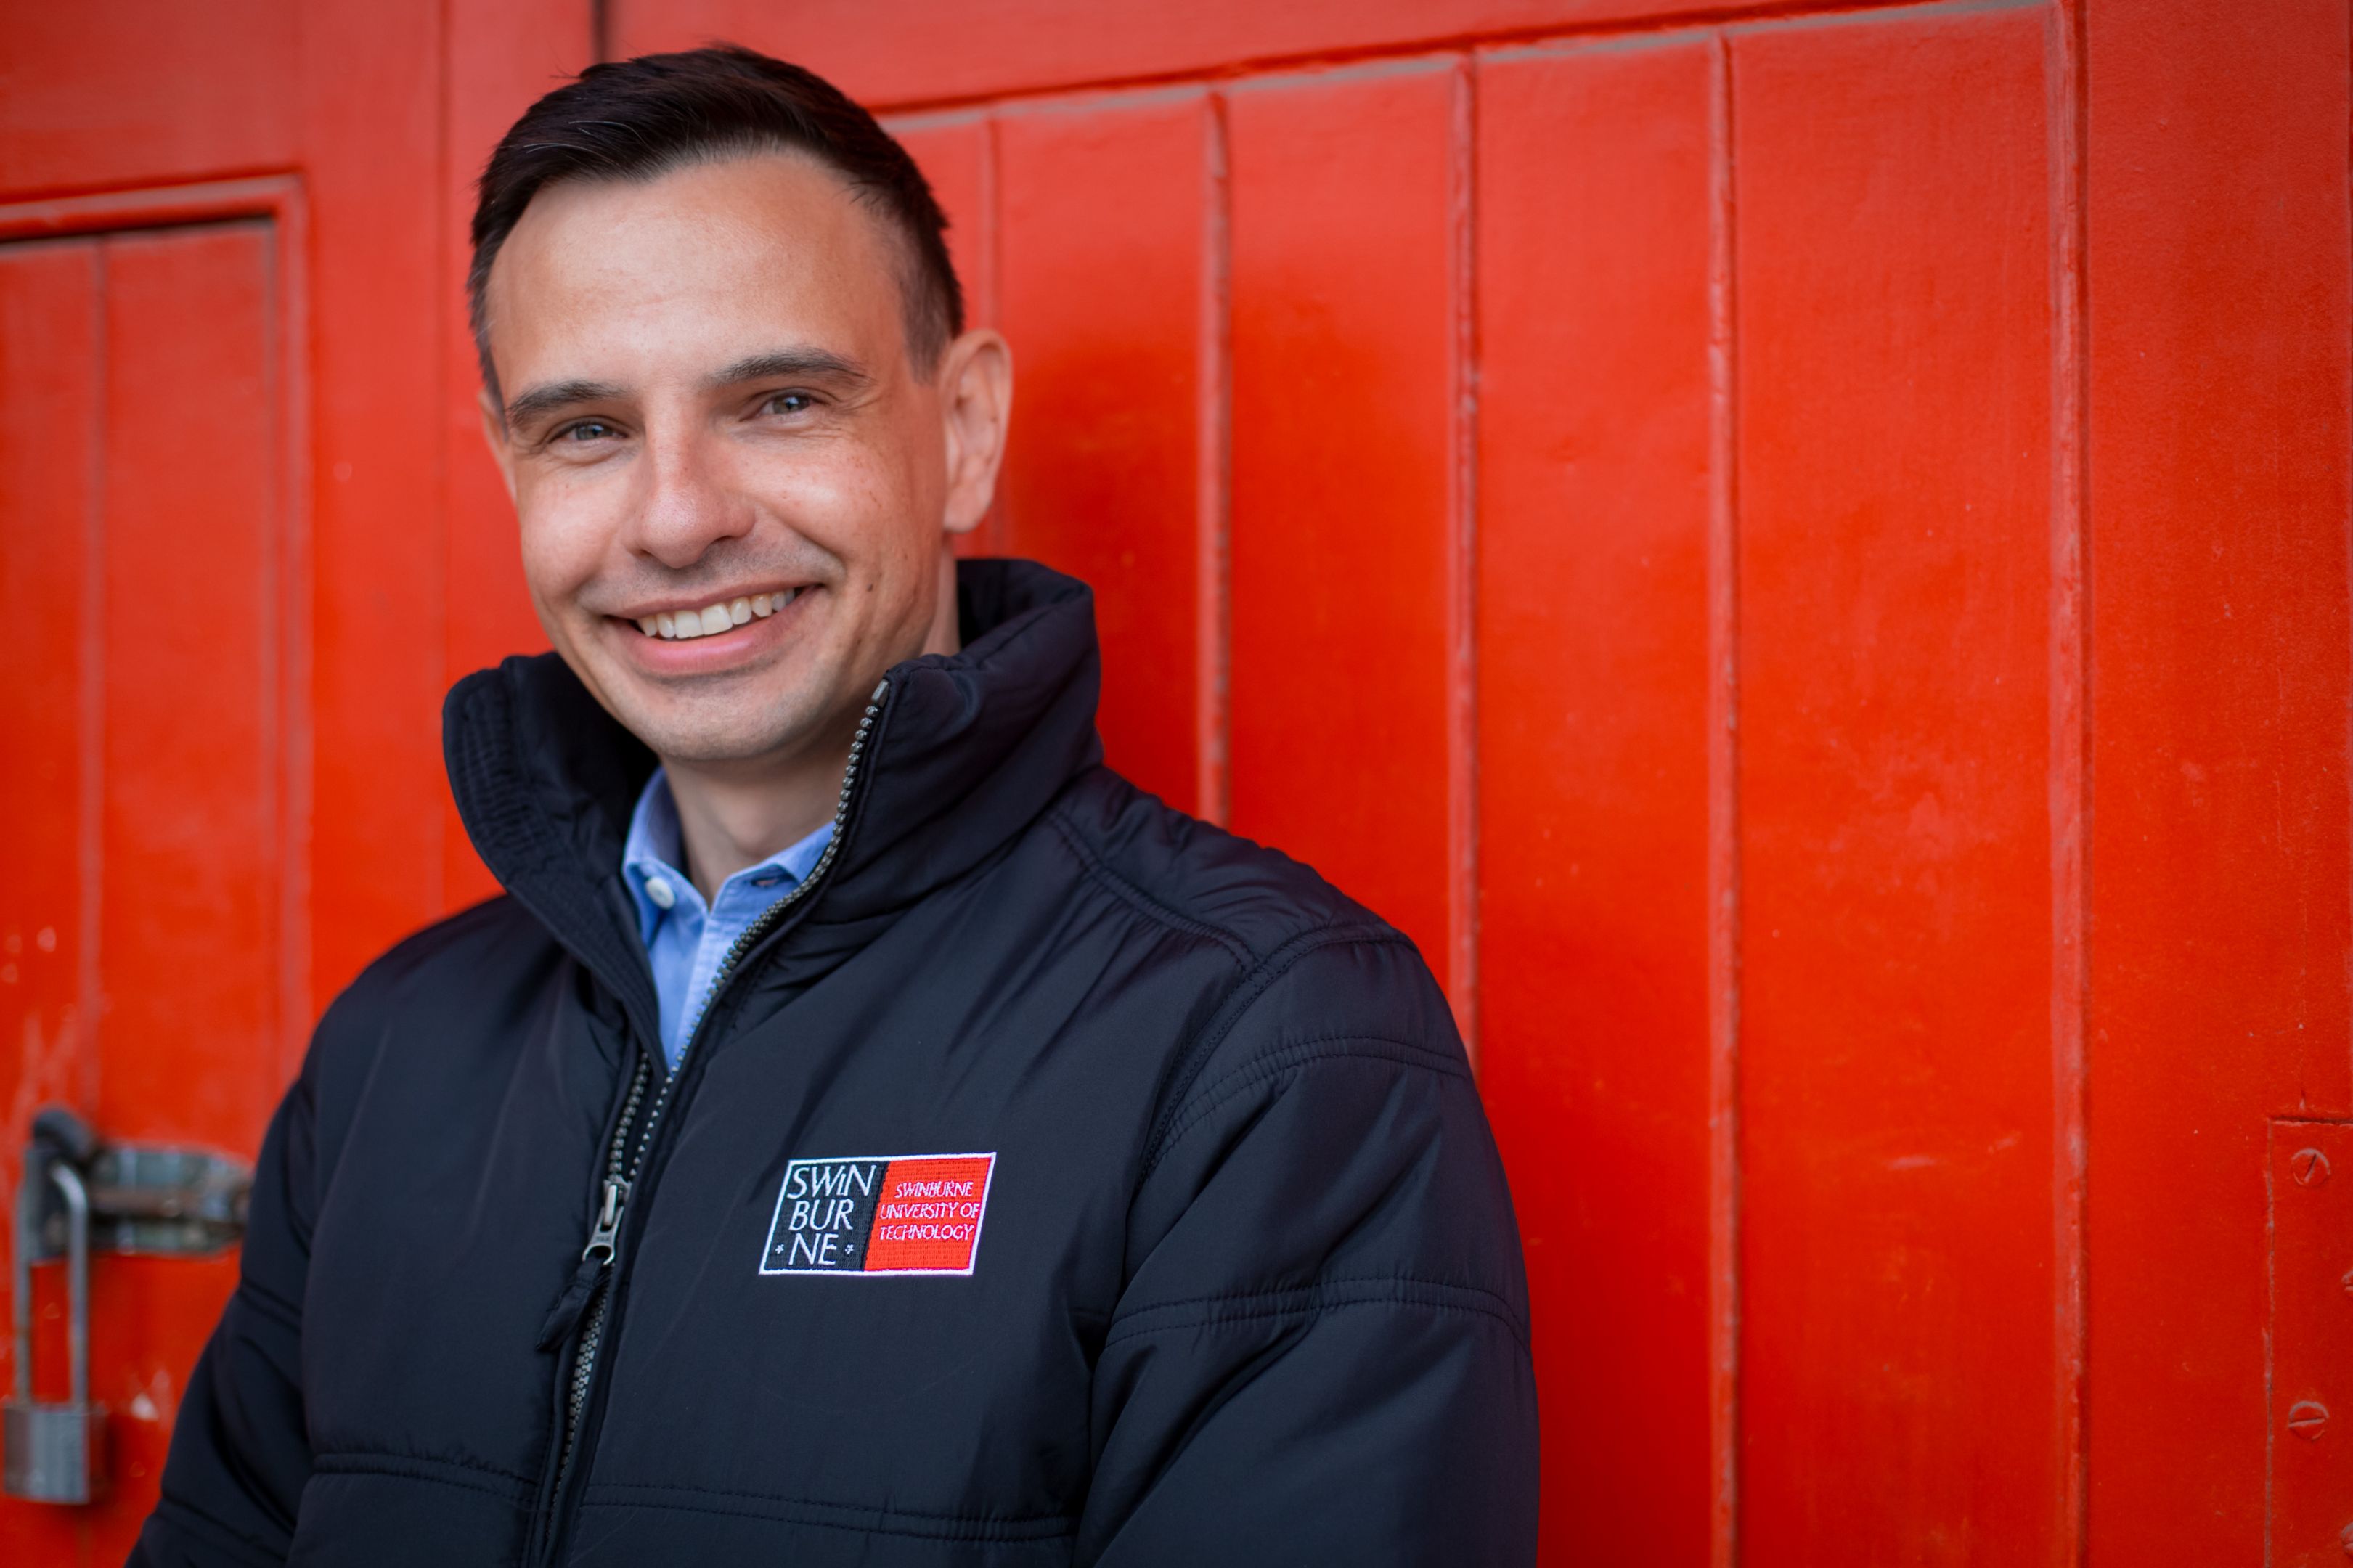 Werner smiles to camera wearing a black jacket featuring the SUT logo with a bright red wall in the background